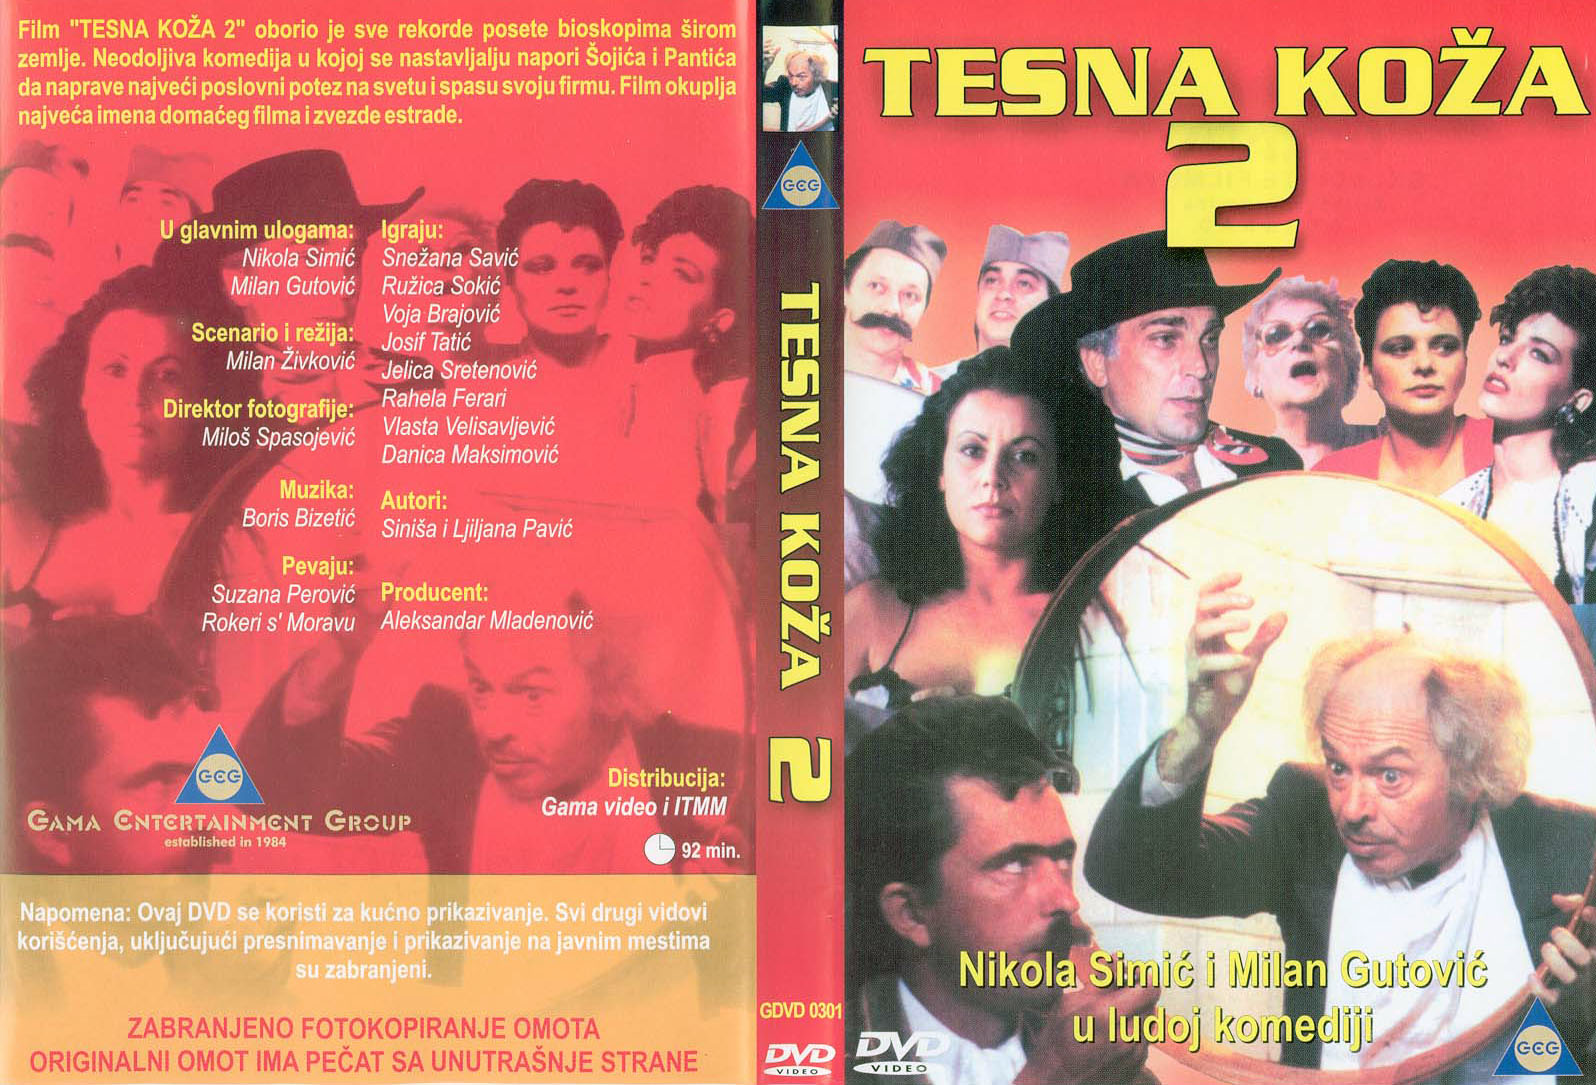 Click to view full size image -  DVD Cover - T - Tesna_koza_2_-_prednja_zadnja - Tesna_koza_2_-_prednja_zadnja.jpg